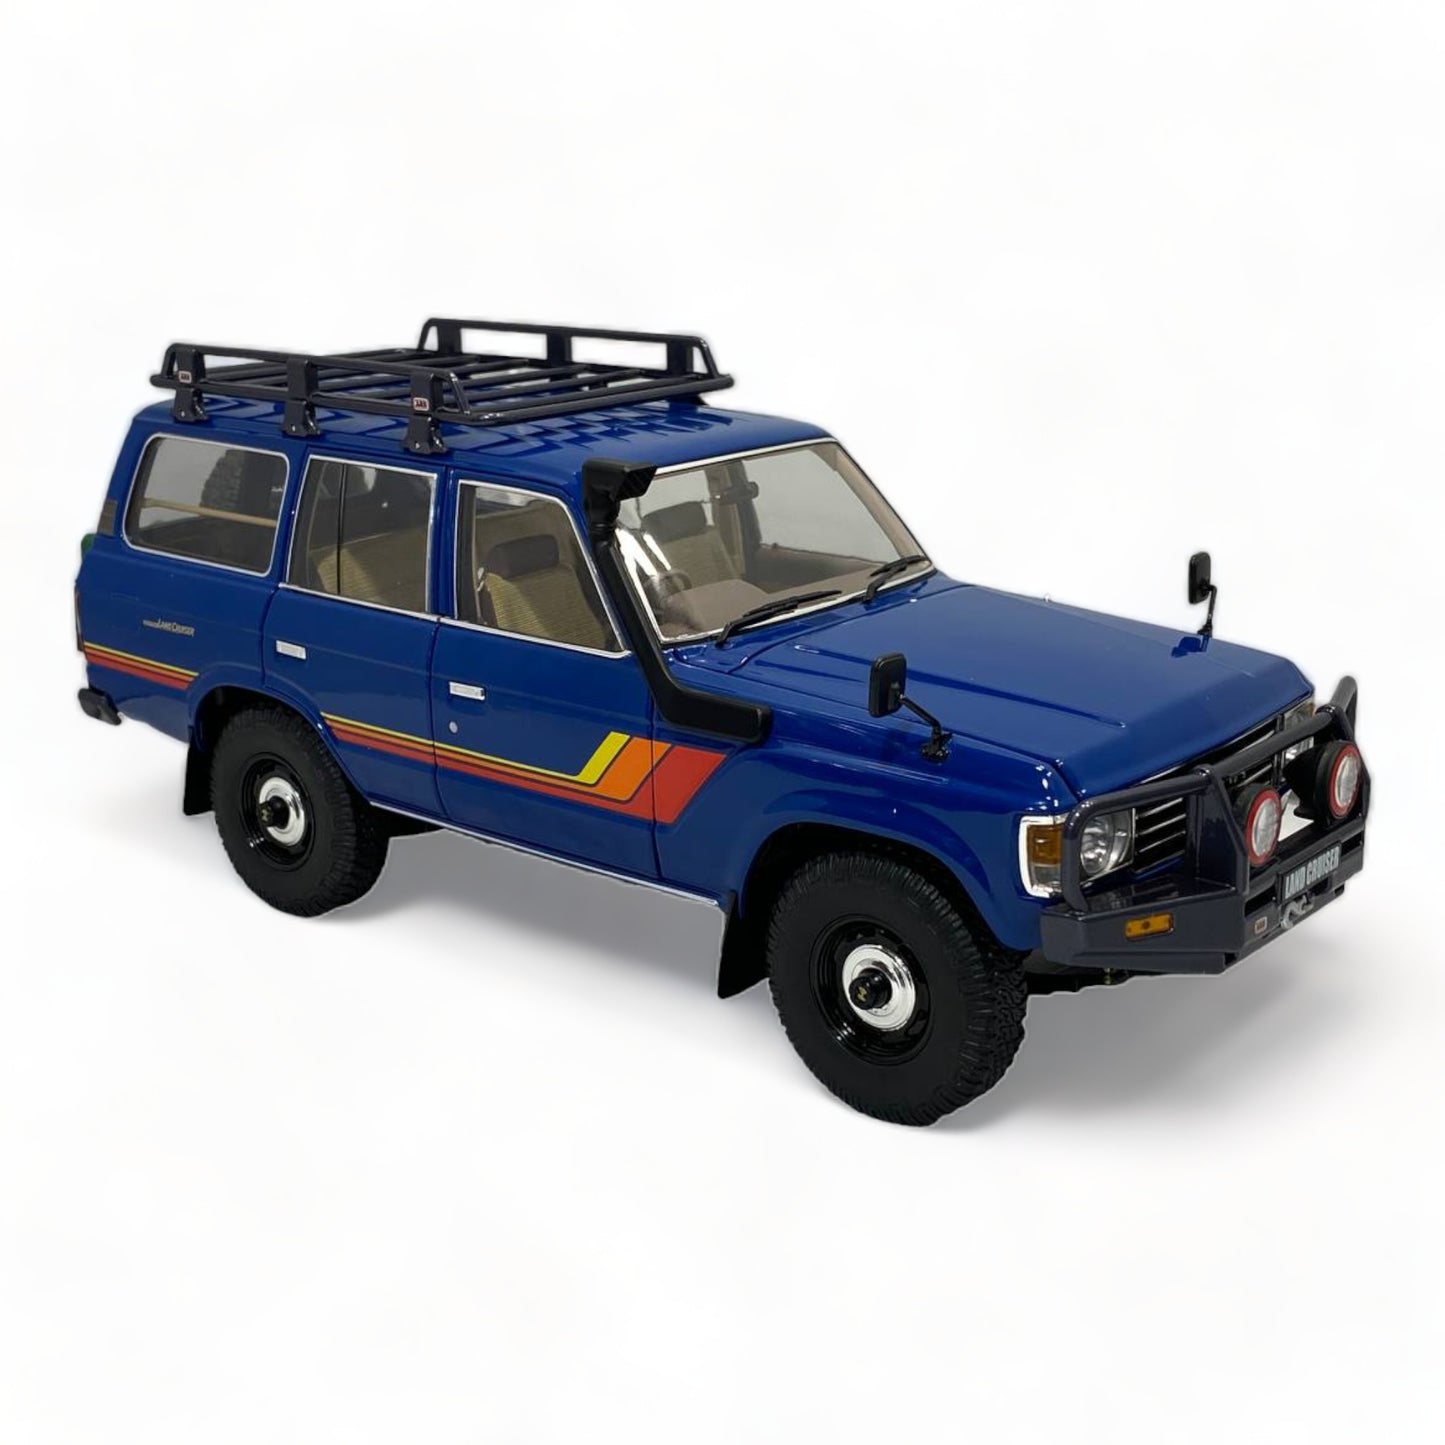 Toyota Land Cruiser 60 (1/18) blue with sticker by Kyosho